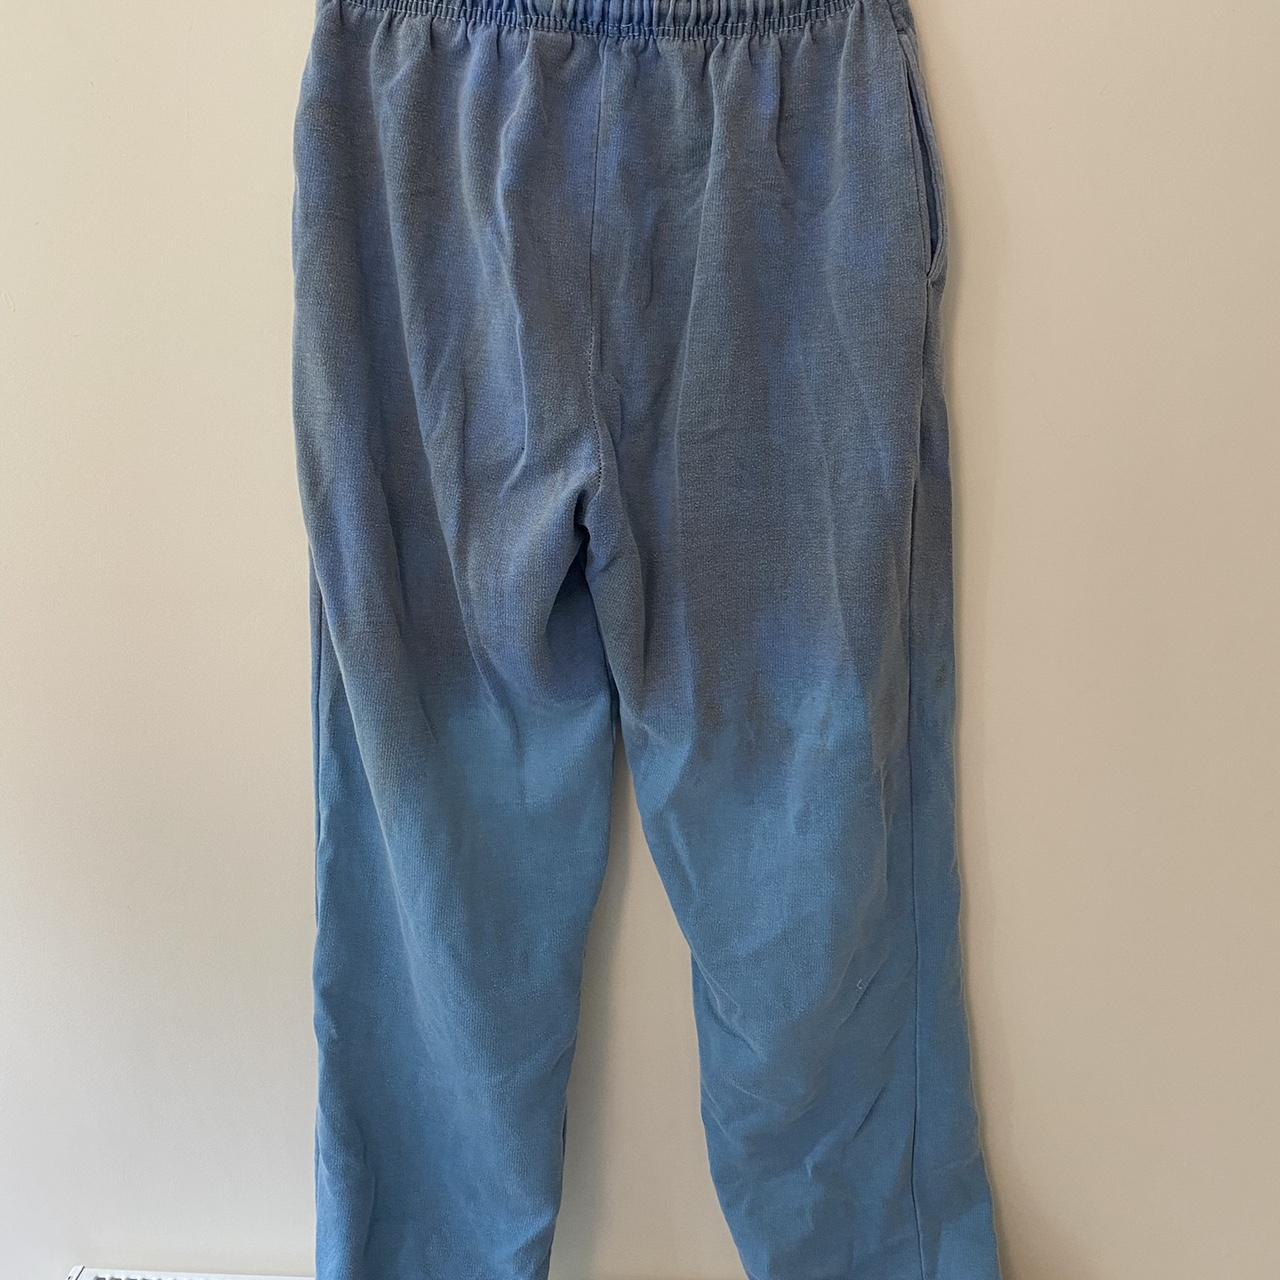 Iets frans blue joggers. So comfy and such a funky... - Depop